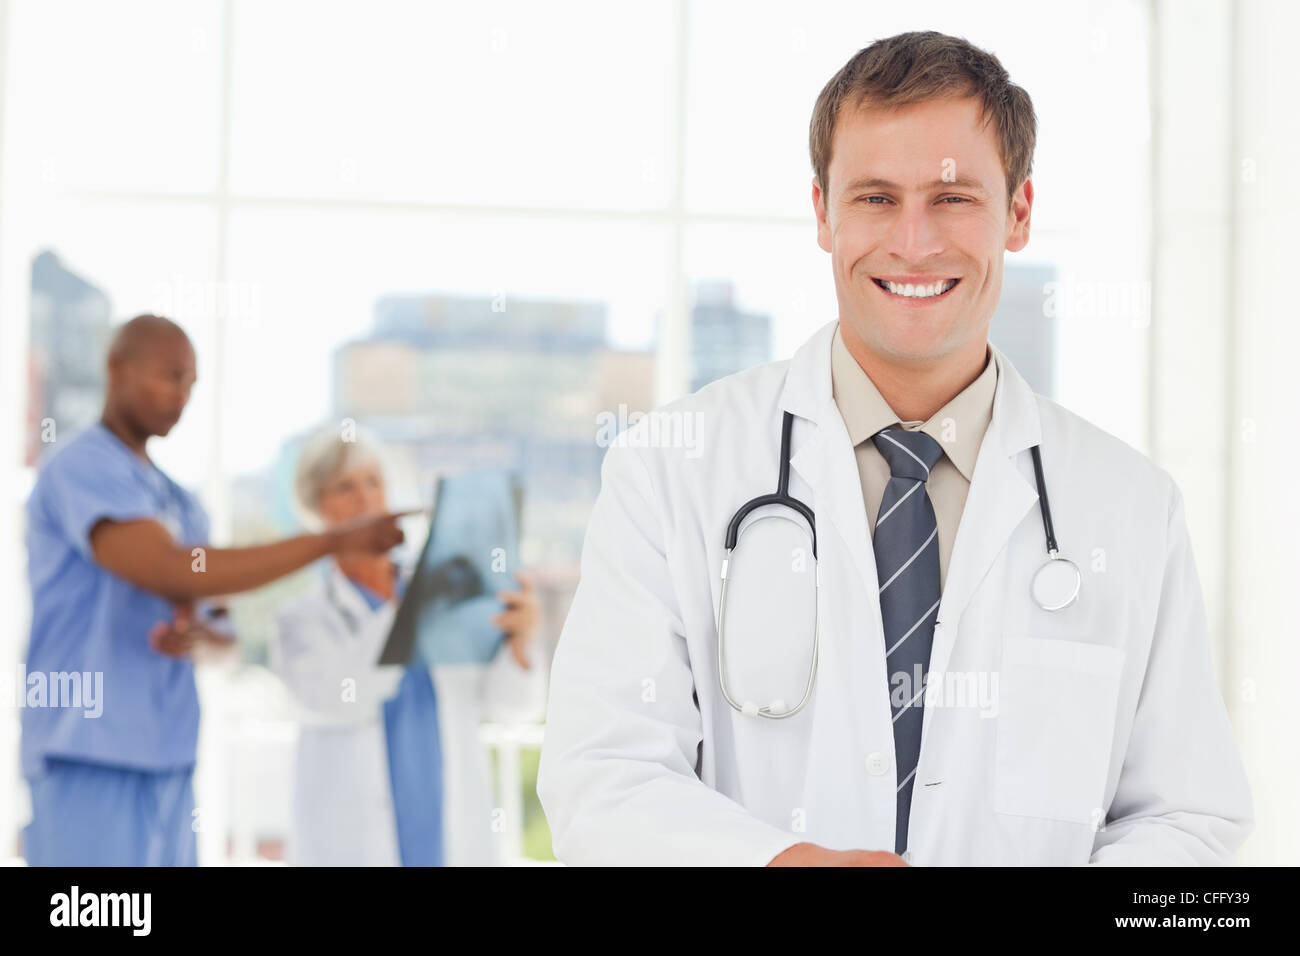 Smiling doctor with colleagues behind him Stock Photo